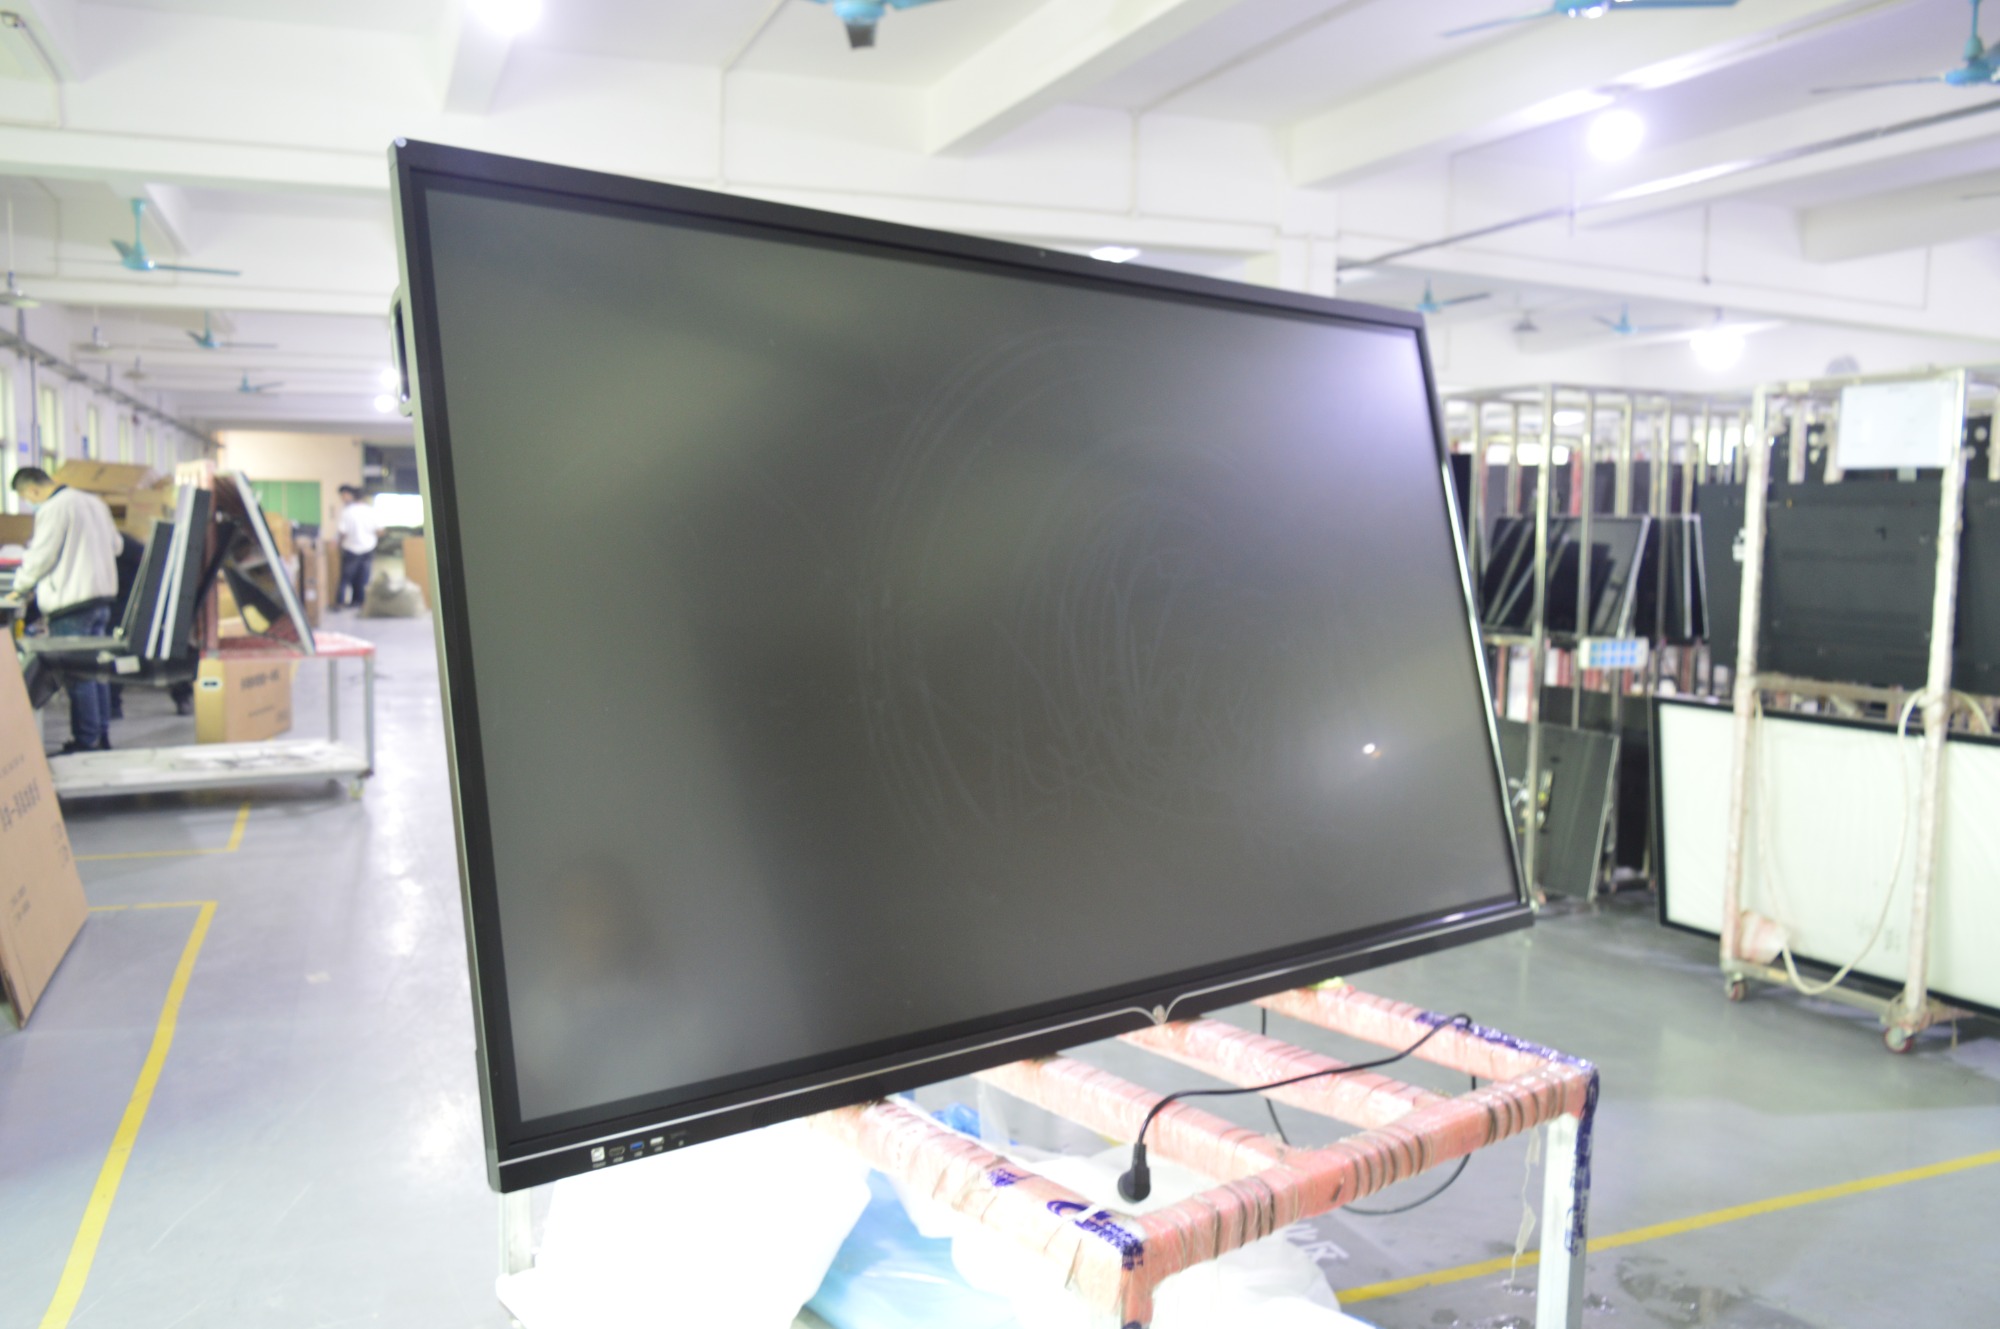 Philippine customer’s 75-inch built-in camera interactive whiteboard is tested before shipment